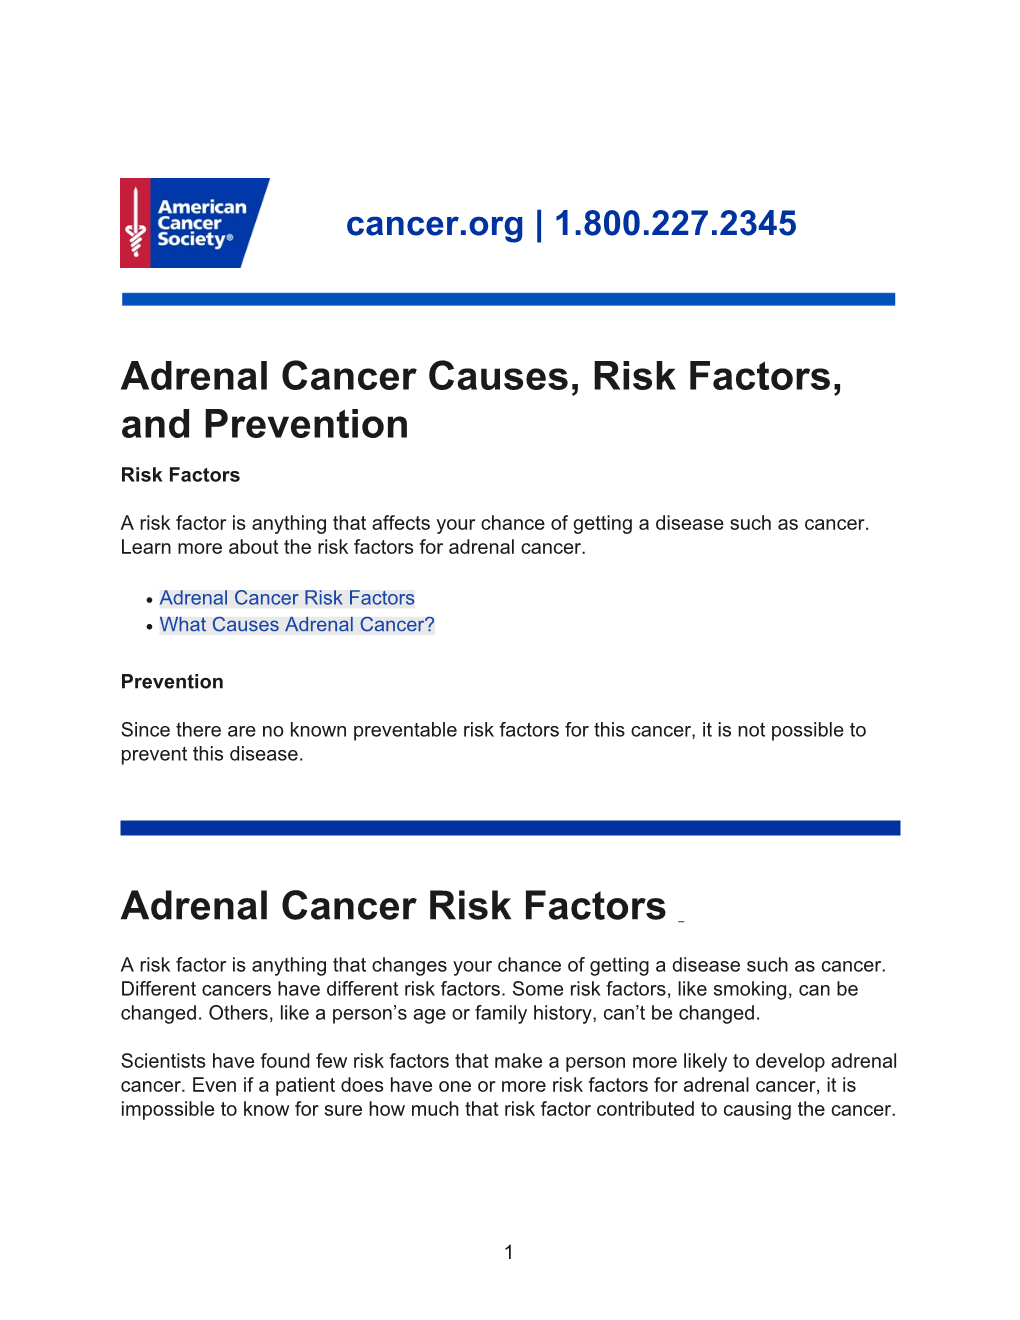 Adrenal Cancer Causes, Risk Factors, and Prevention Adrenal